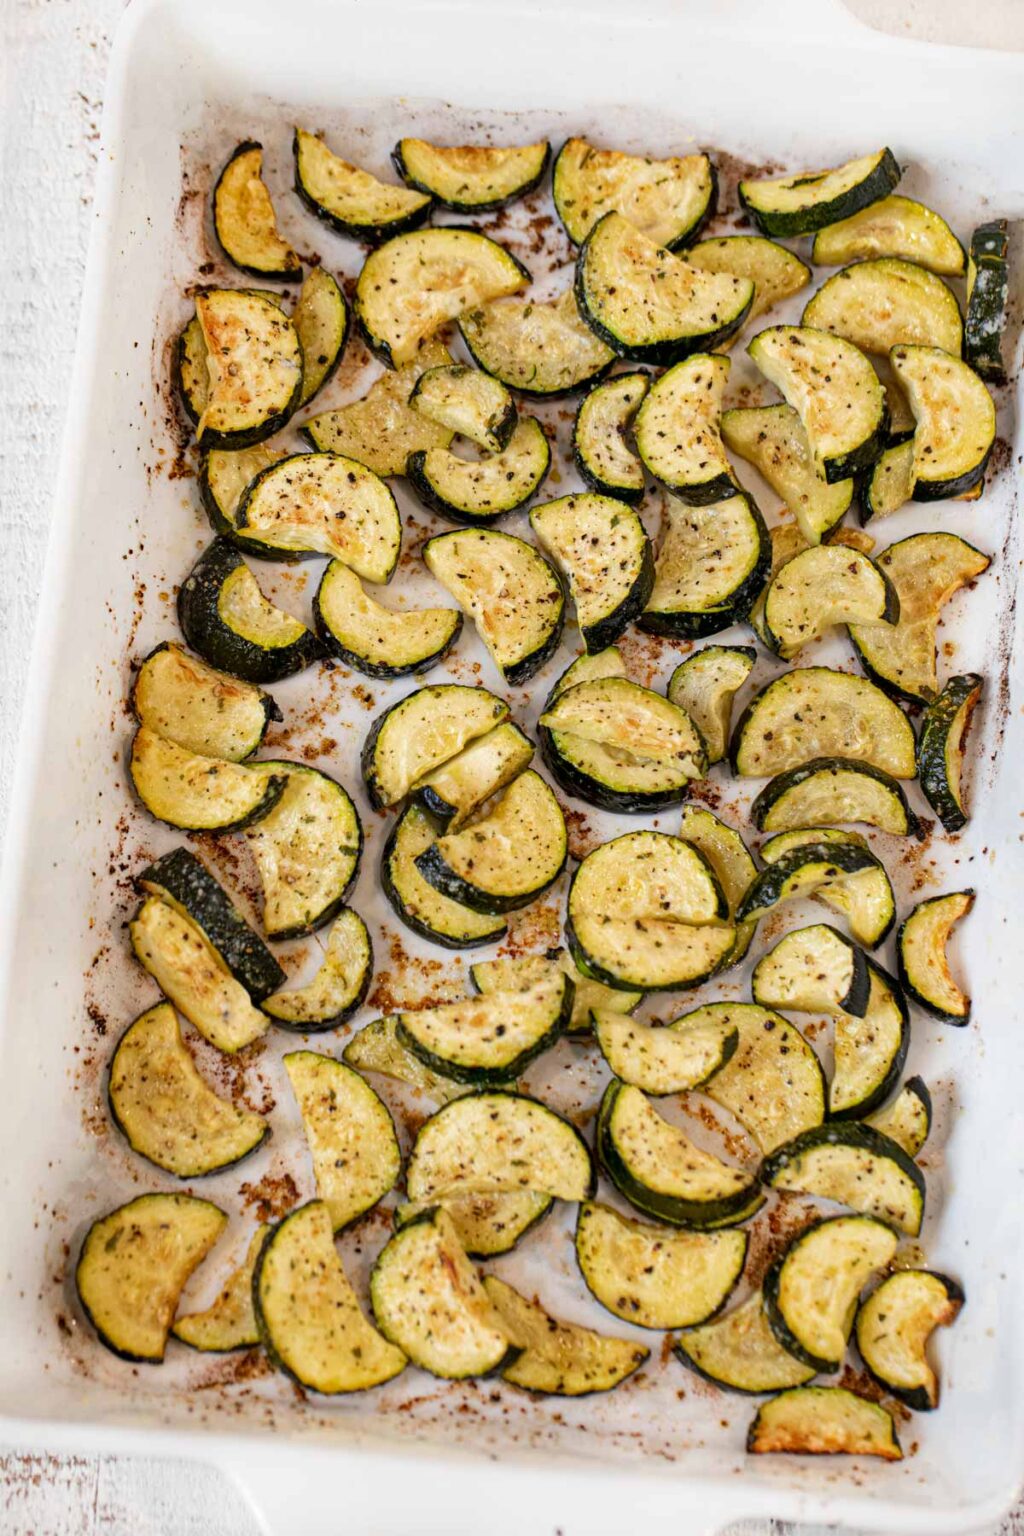 Easy Roasted Zucchini Recipe - Cooking Made Healthy